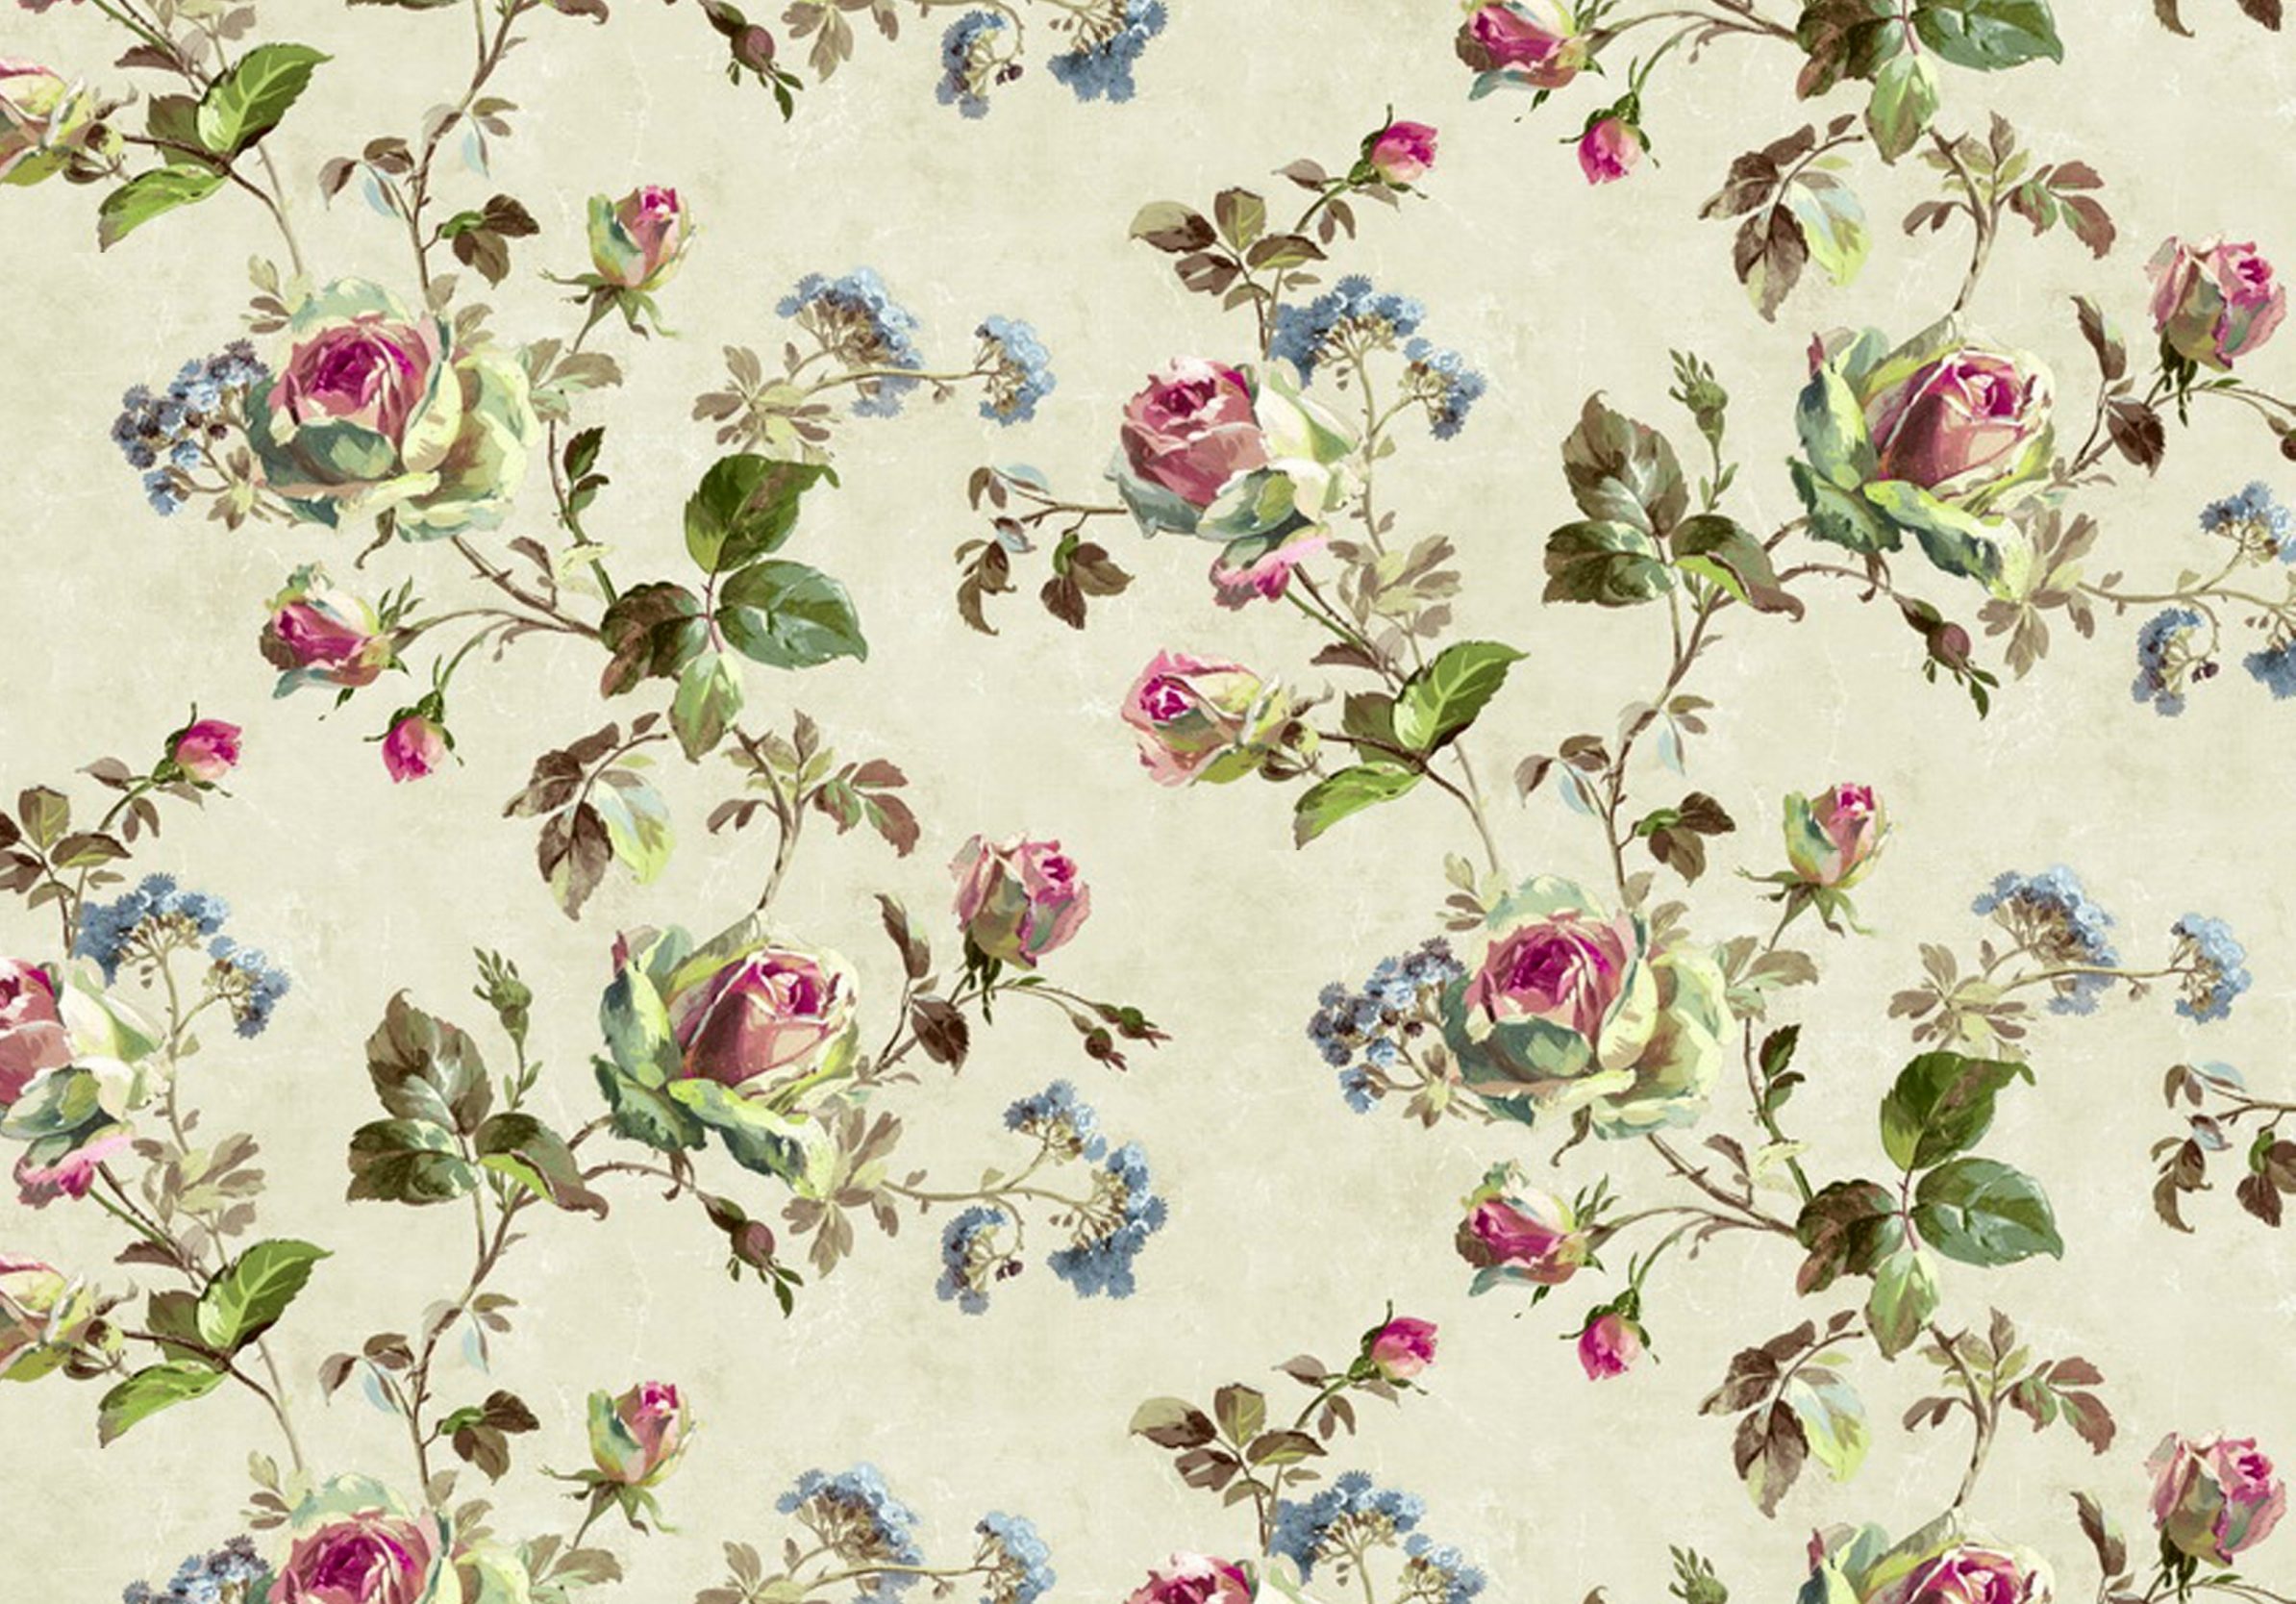 2388x1668 iPad Pro wallpapers Aesthetic Paper Colorful Flowers Paint iPad Wallpaper 2388x1668 pixels resolution